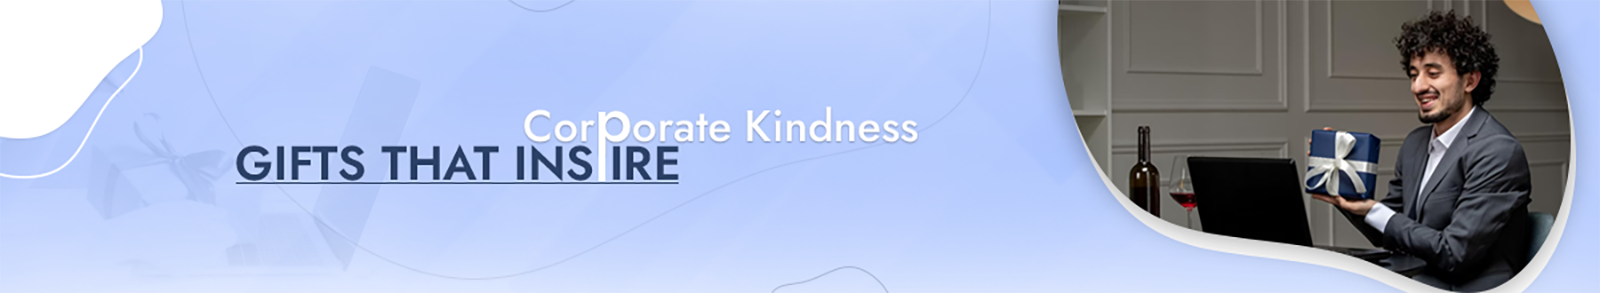 Corporate Kindness Gifts That Inspire